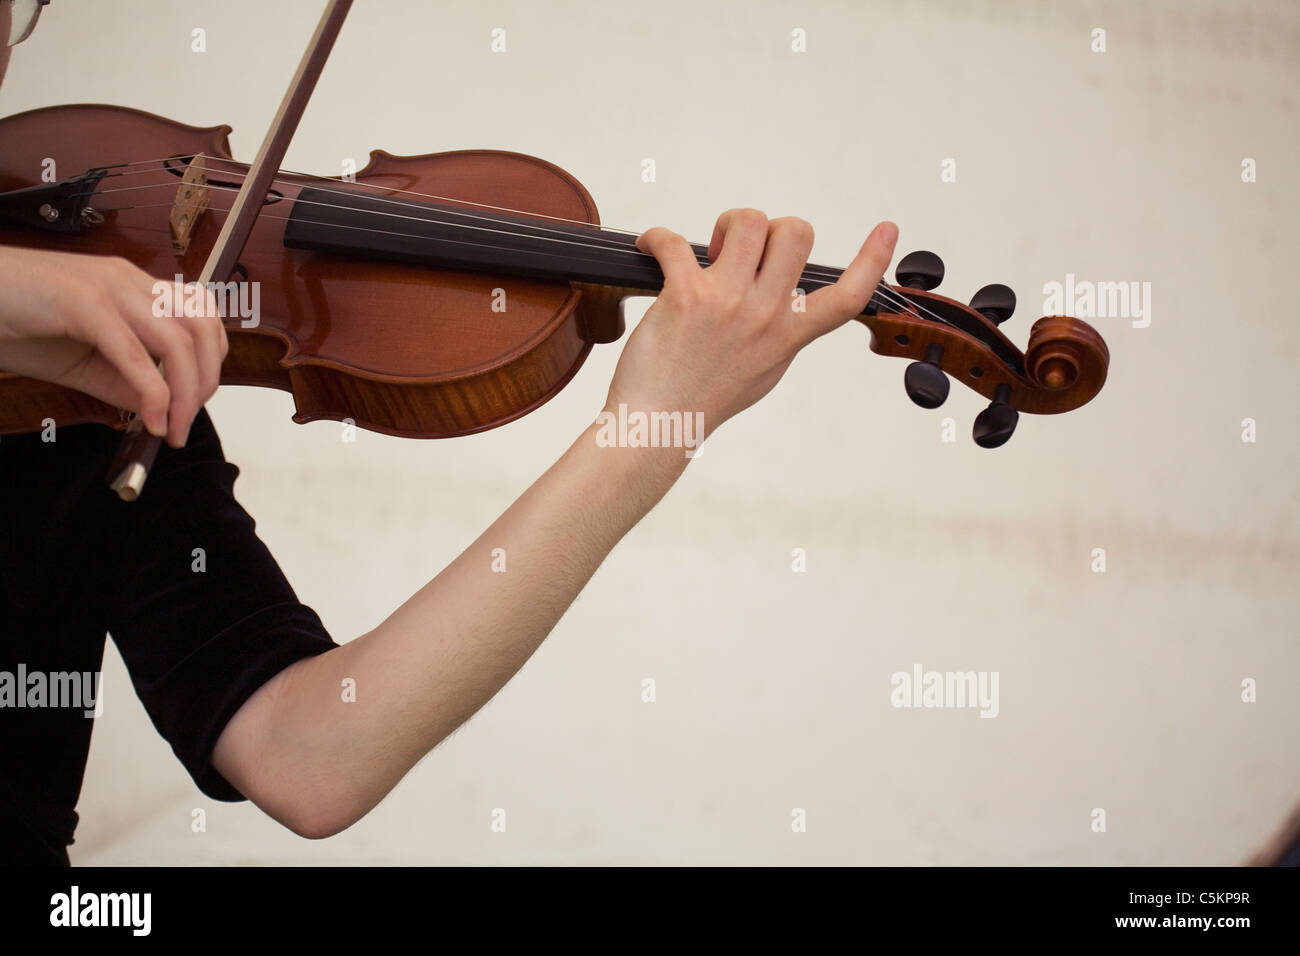 Hands and left arm of young woman playing a violin, close-up Stock Photo